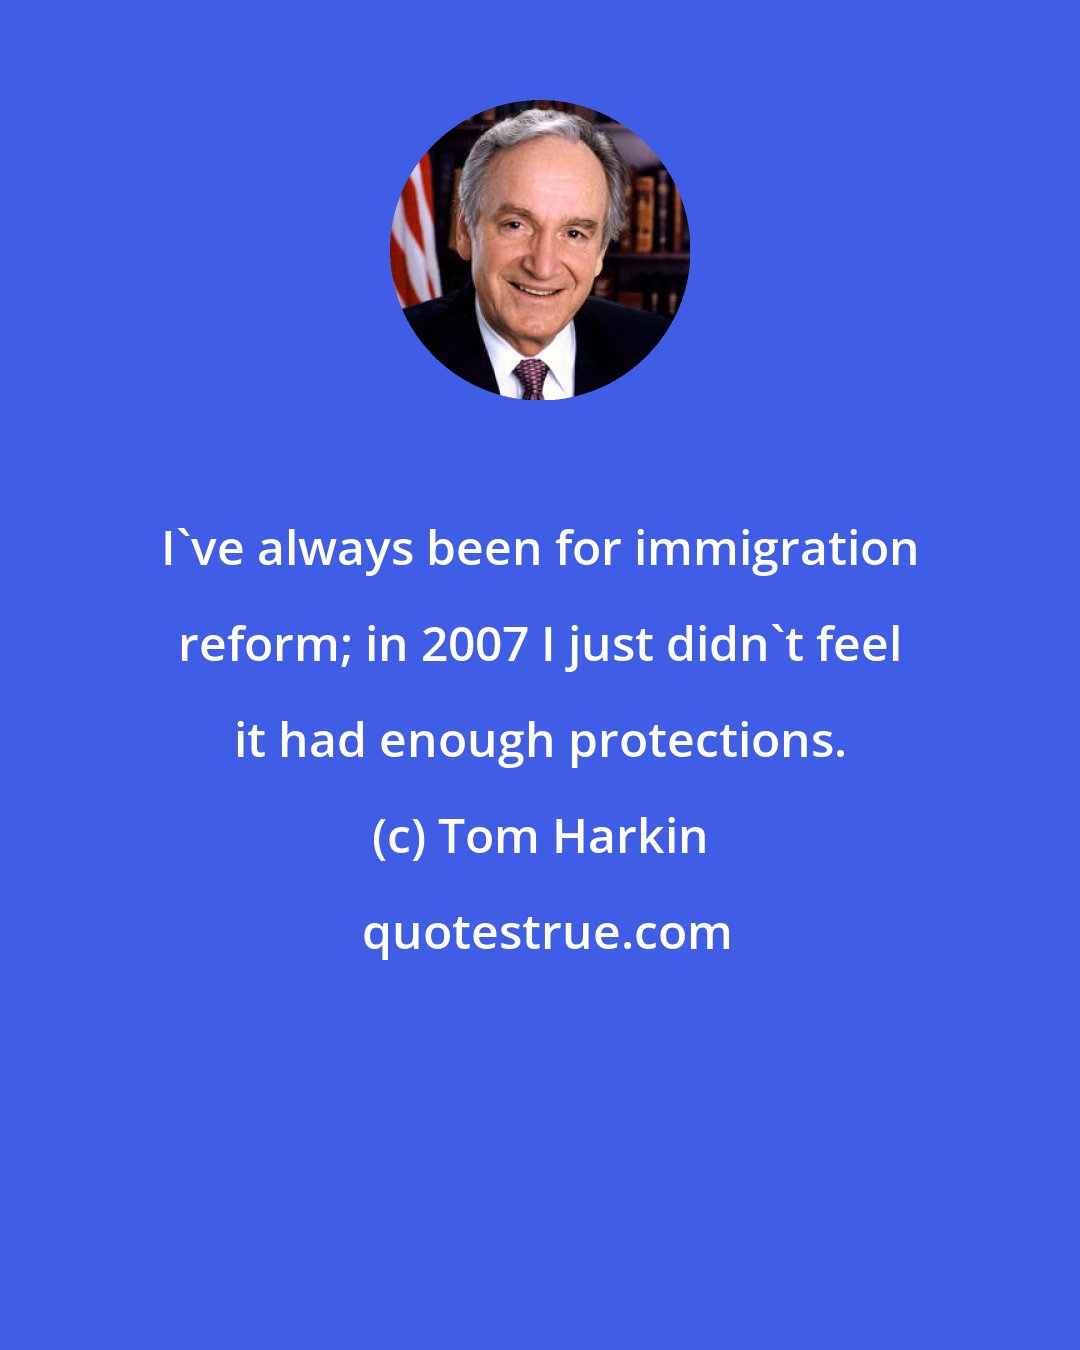 Tom Harkin: I've always been for immigration reform; in 2007 I just didn't feel it had enough protections.